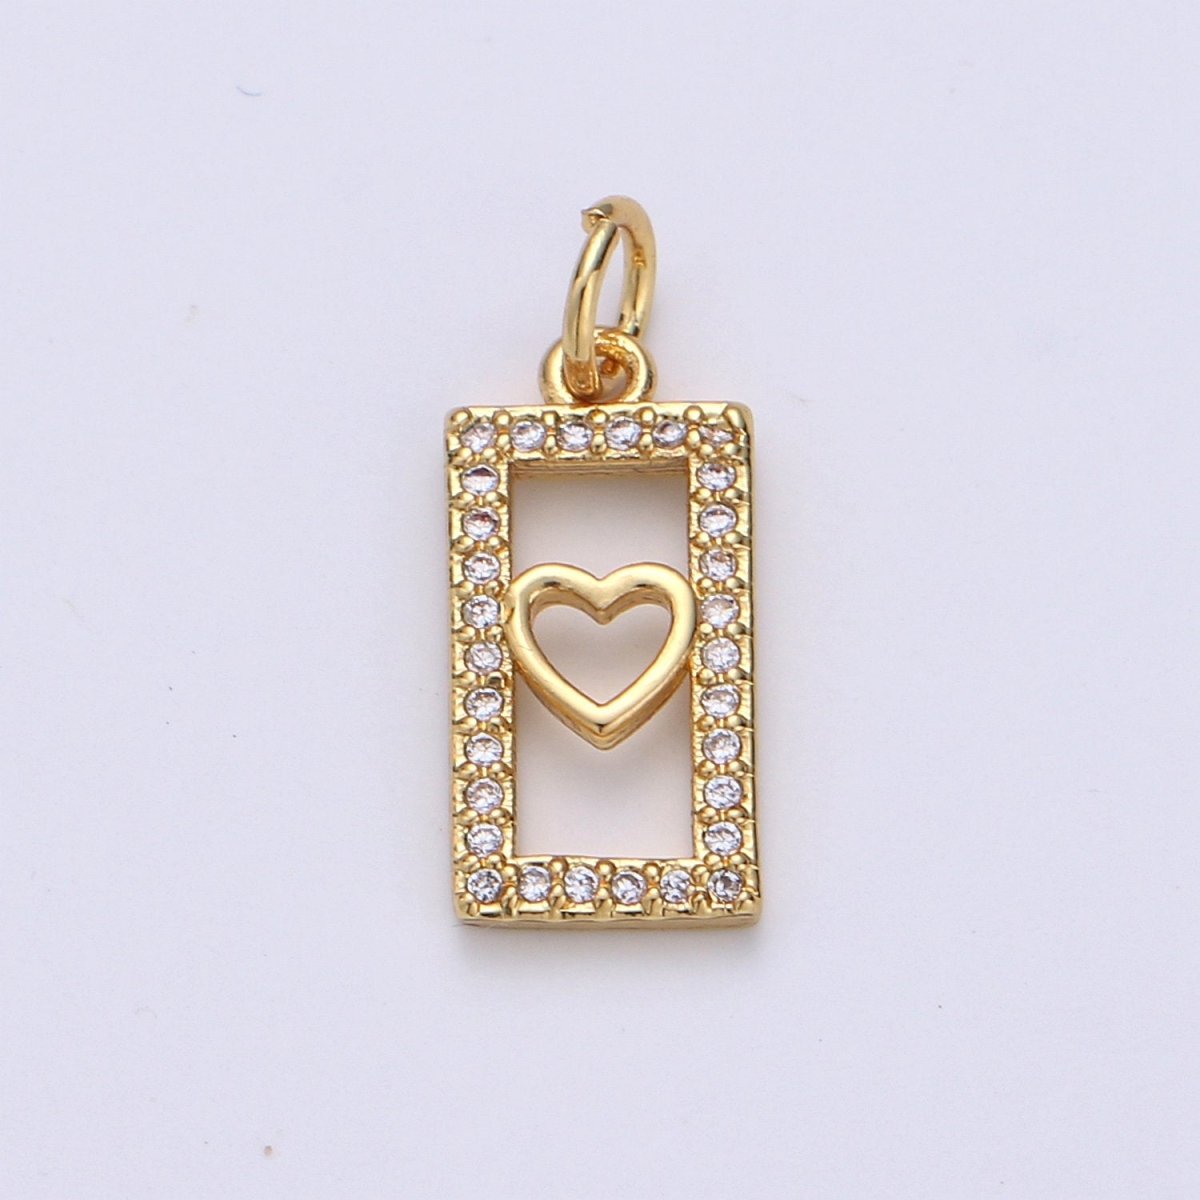 Tiny Heart Charm CZ Cubic Zirconia Mini Lover Charm Gold Charm 14k Gold Filled Micro Pave Charm for Bracelet Necklace Earring Jewelry, D-242 - DLUXCA